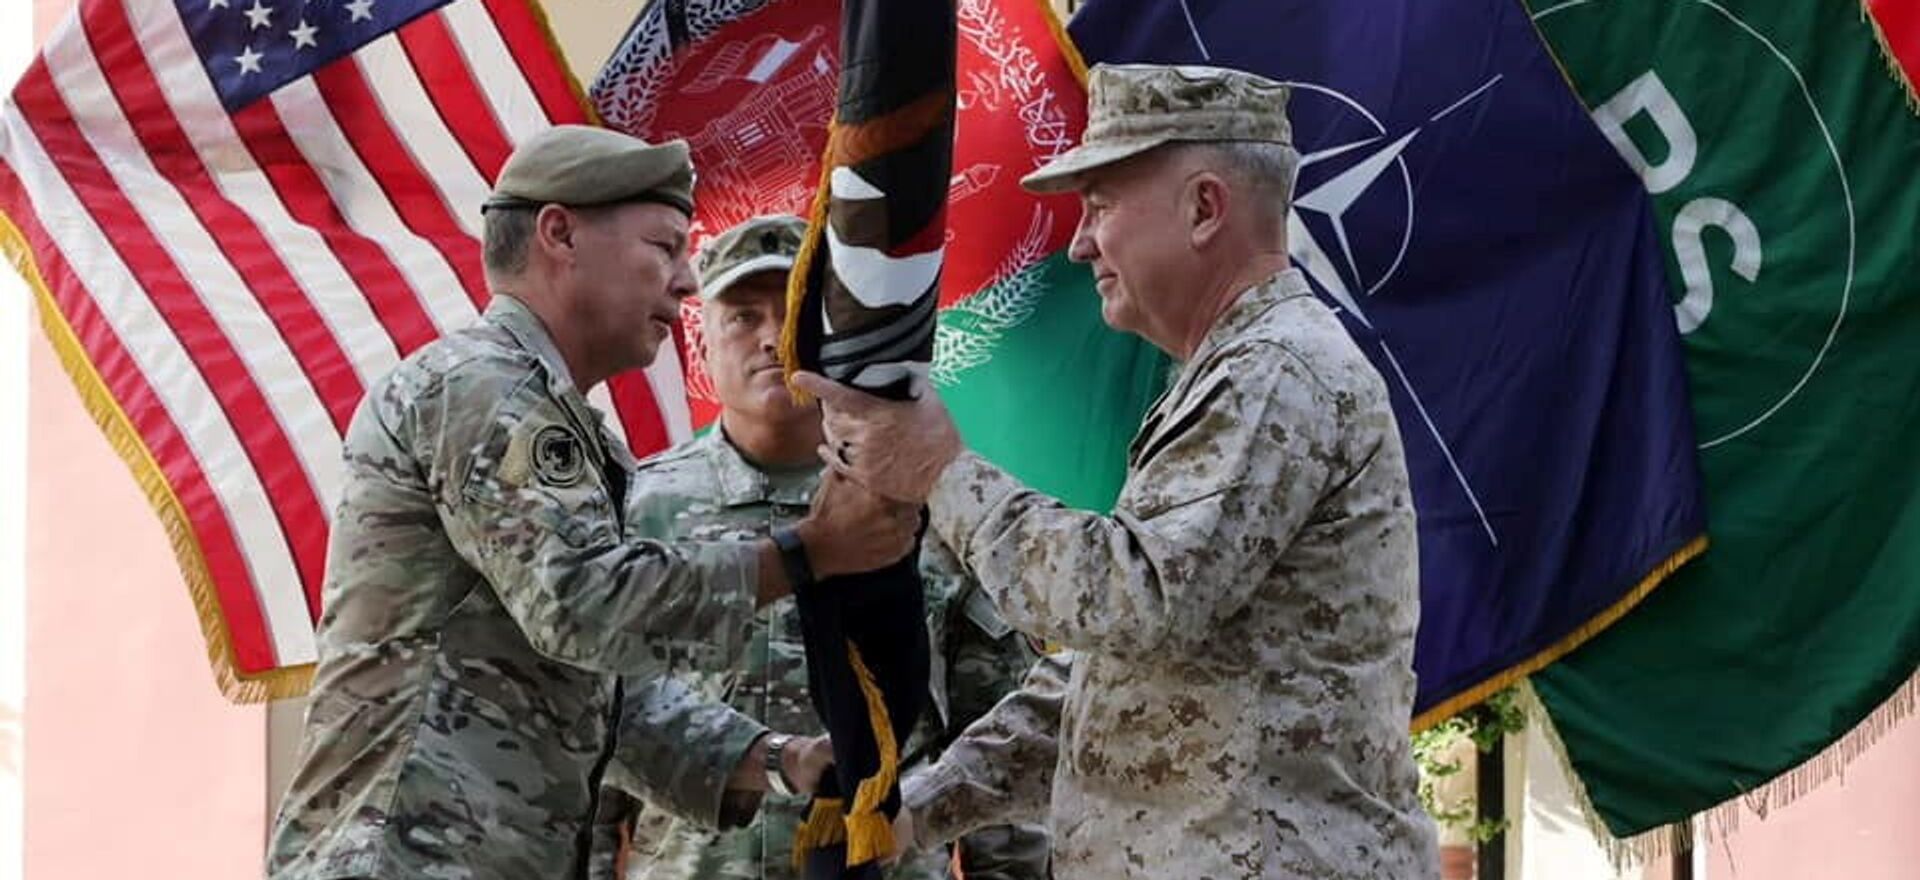 General Austin Scott Miller, commander of U.S. forces and NATO's Resolute Support Mission, hands over his command to U.S. Marine General Kenneth McKenzie, during a ceremony in Kabul, Afghanistan July 12, 2021 - Sputnik International, 1920